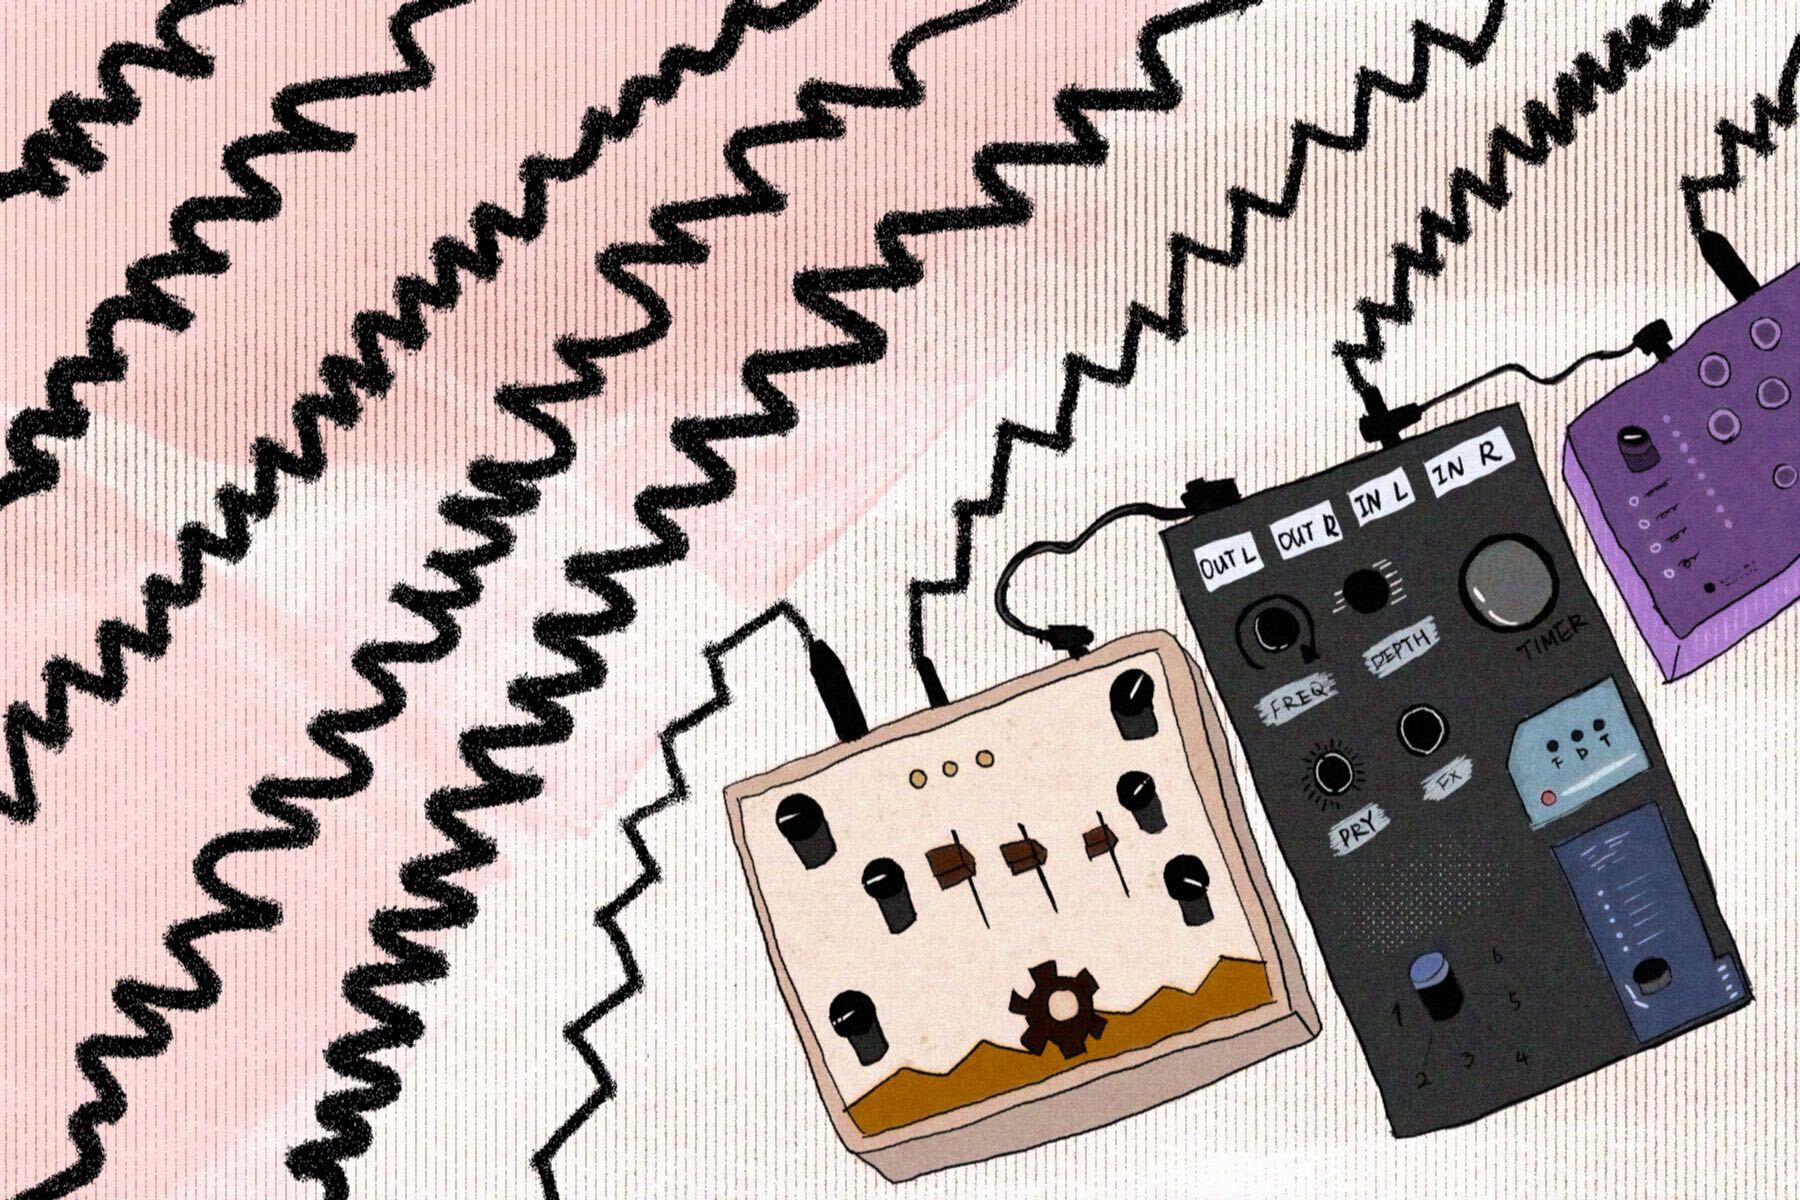 In an article about shoegaze music, three MP3 players send rows of hazy sound waves out over a soft pink background.